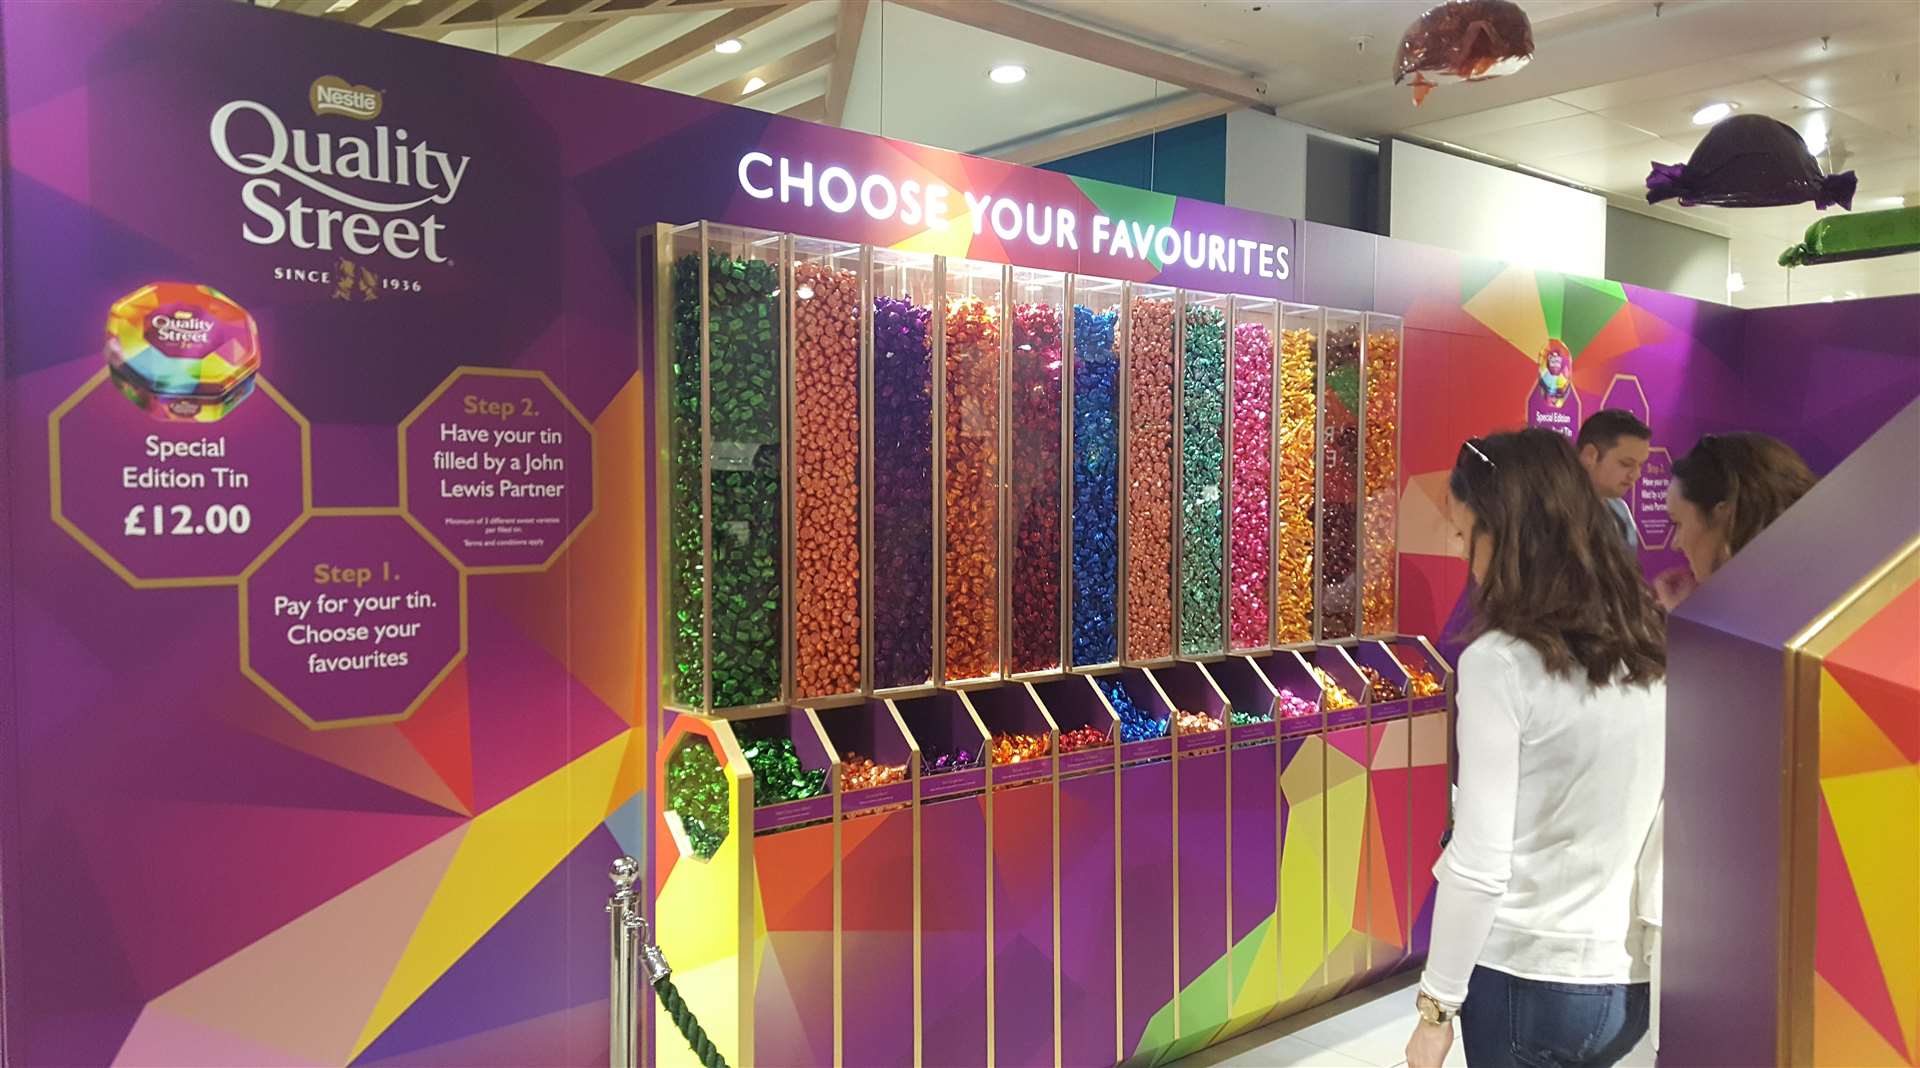 The Quality Street pick and mix service in Oxford Street